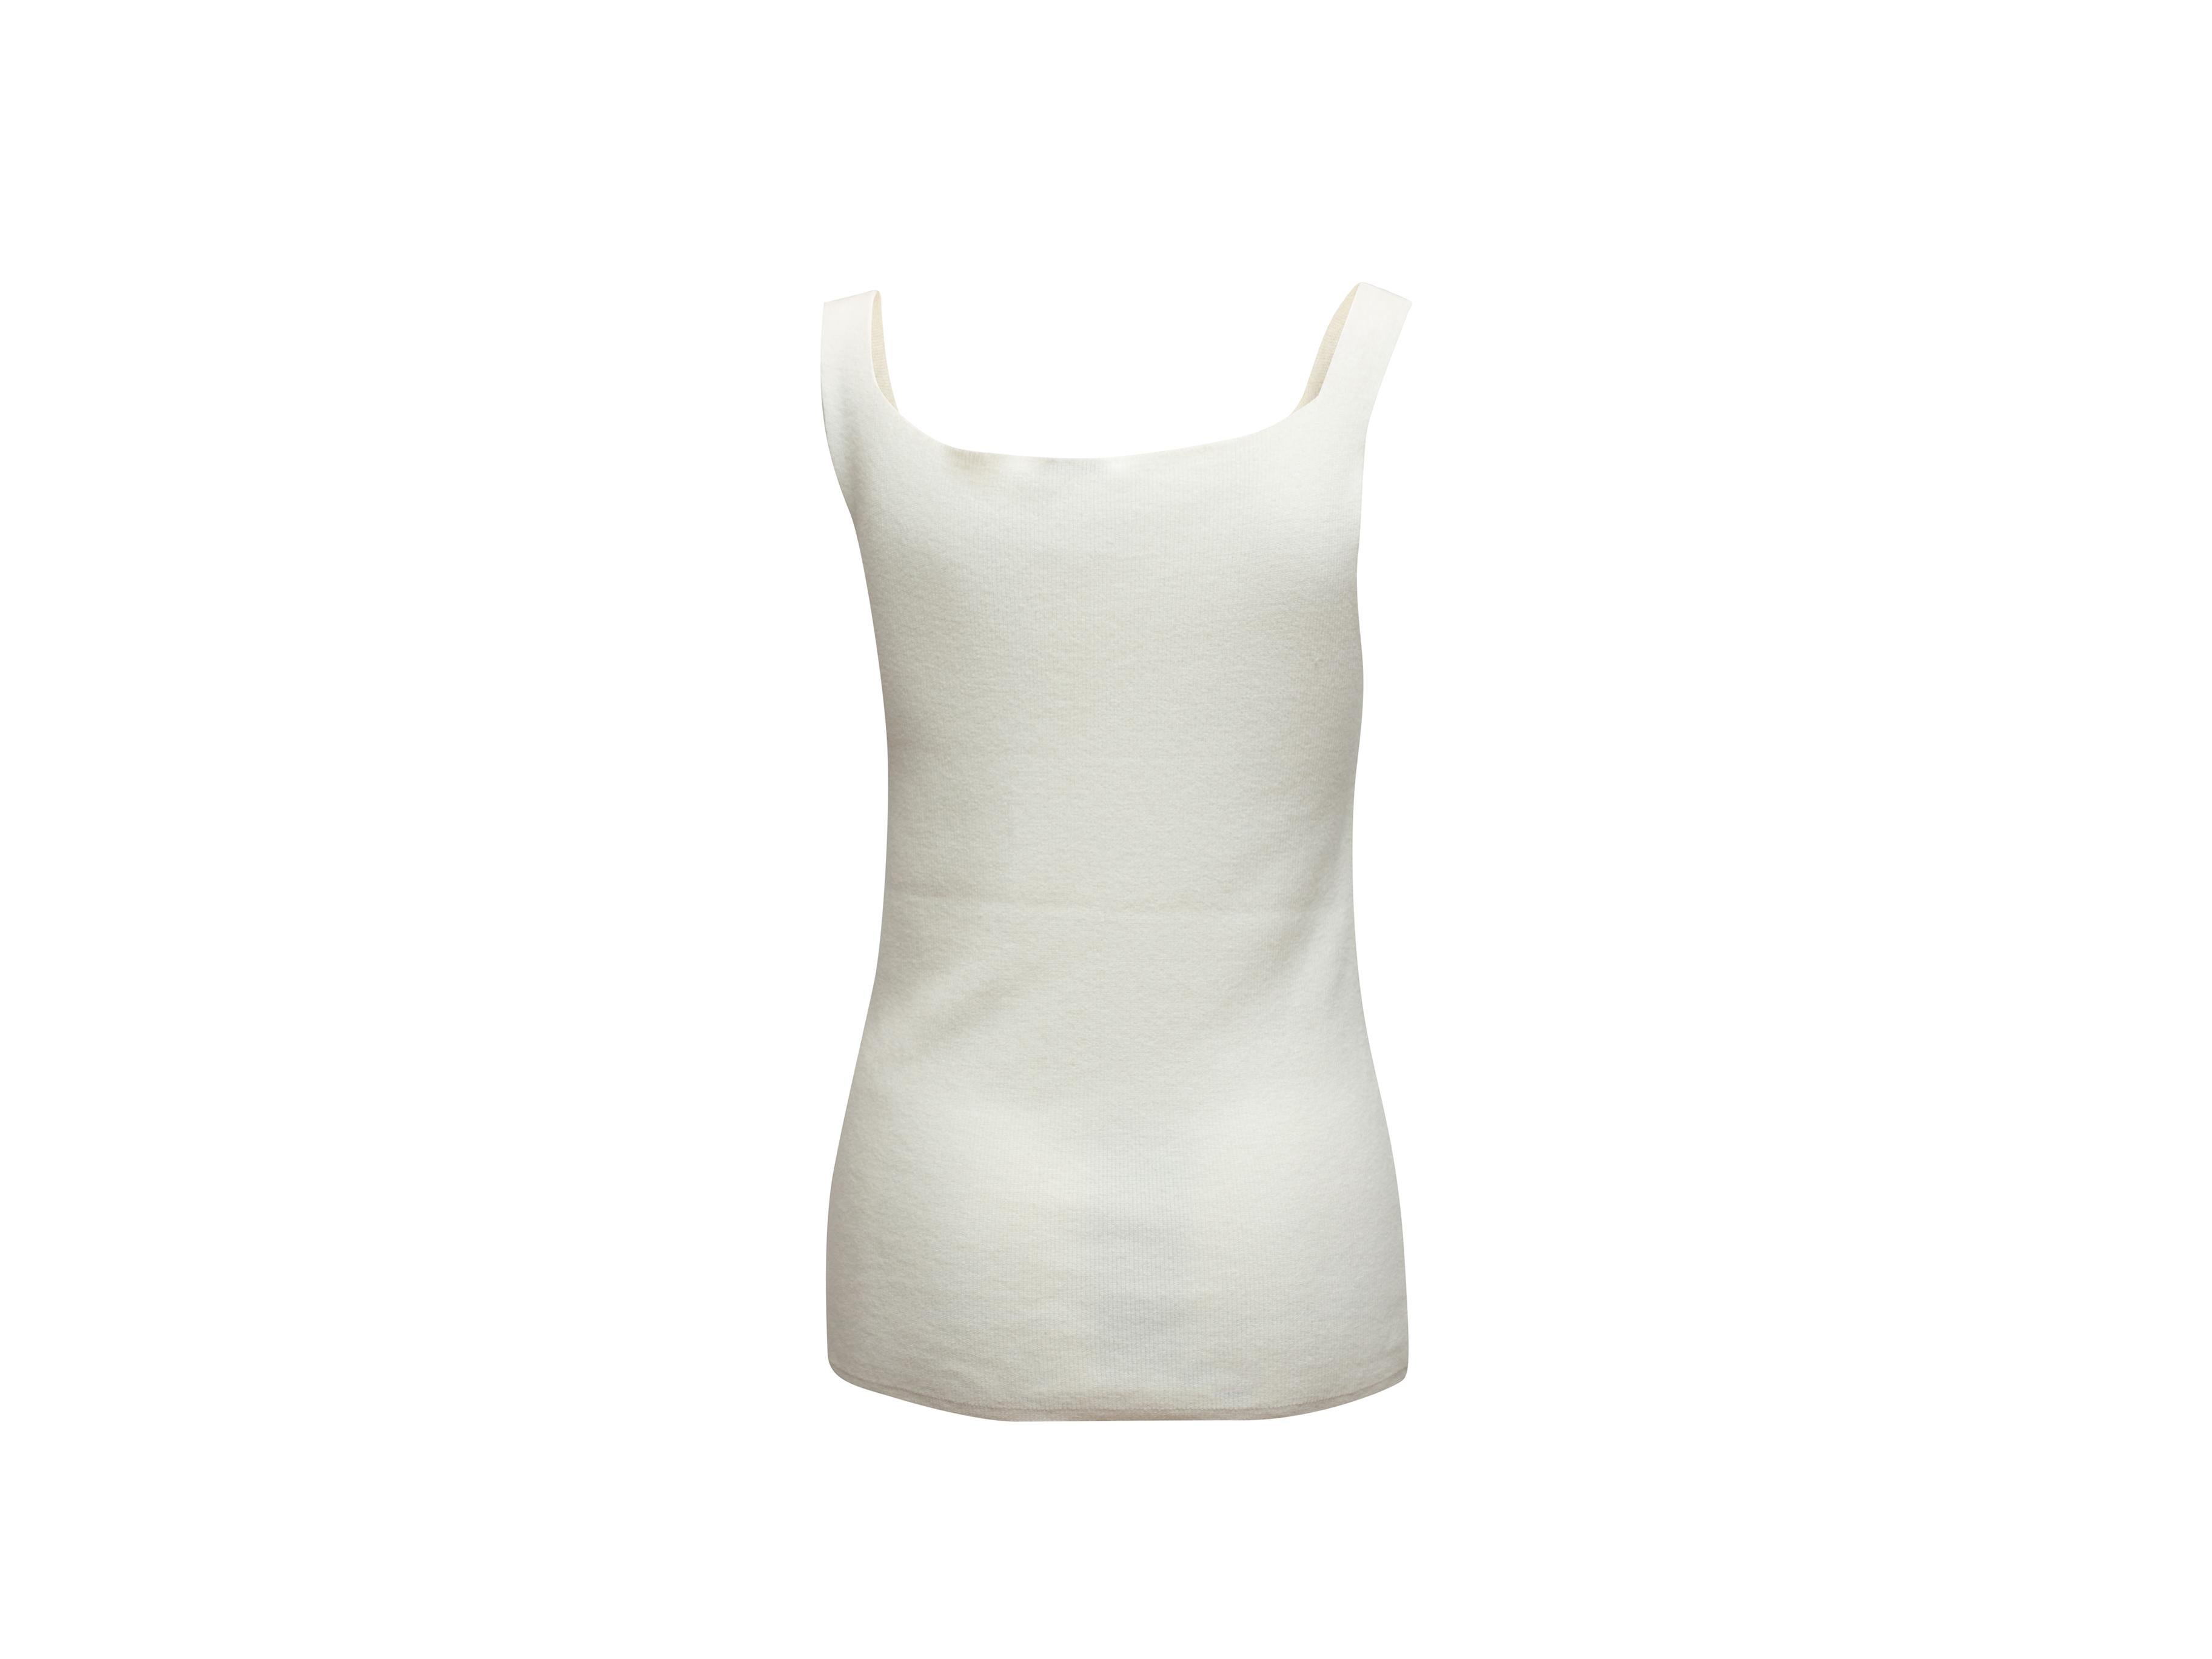 Chanel White Sleeveless Knit Top 2